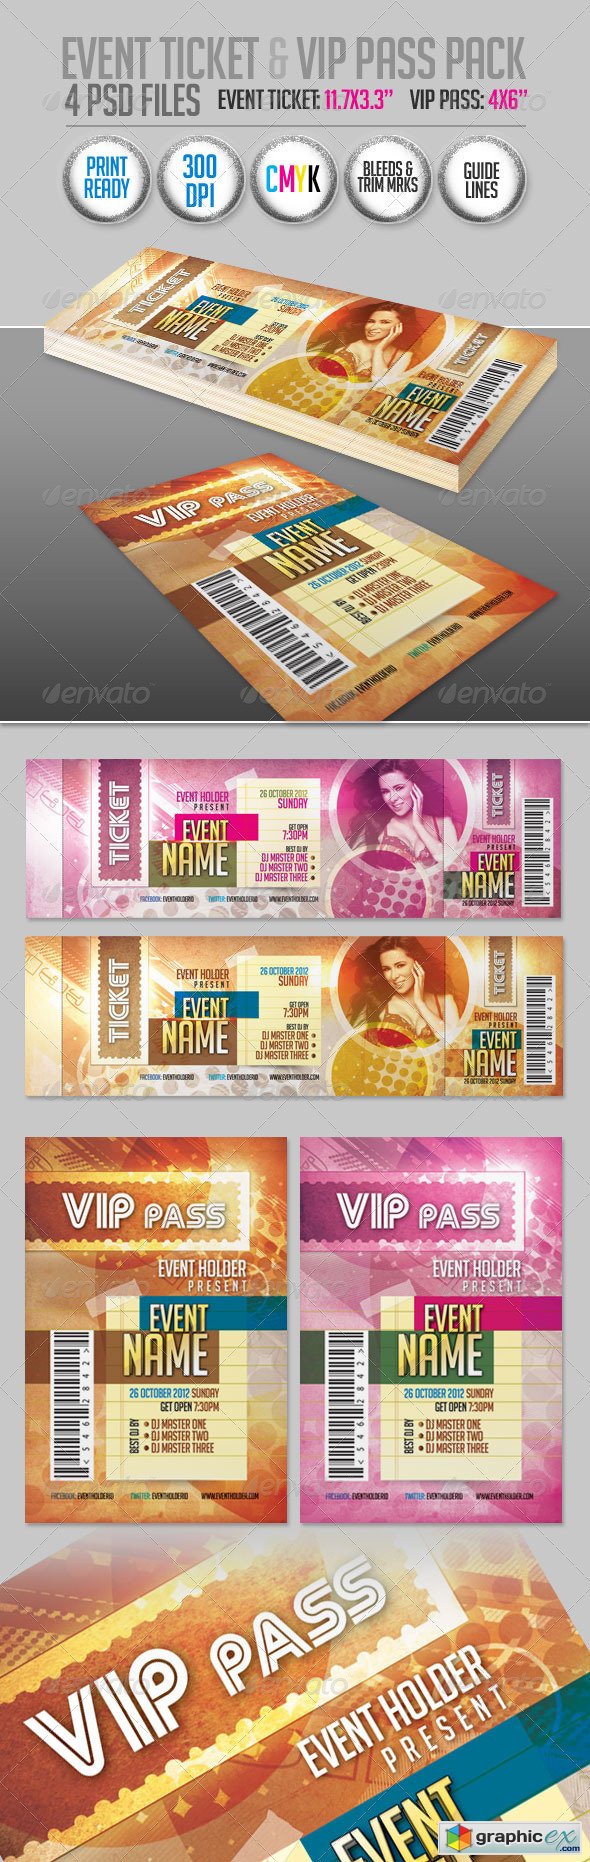 Event Ticket & VIP Pass Pack